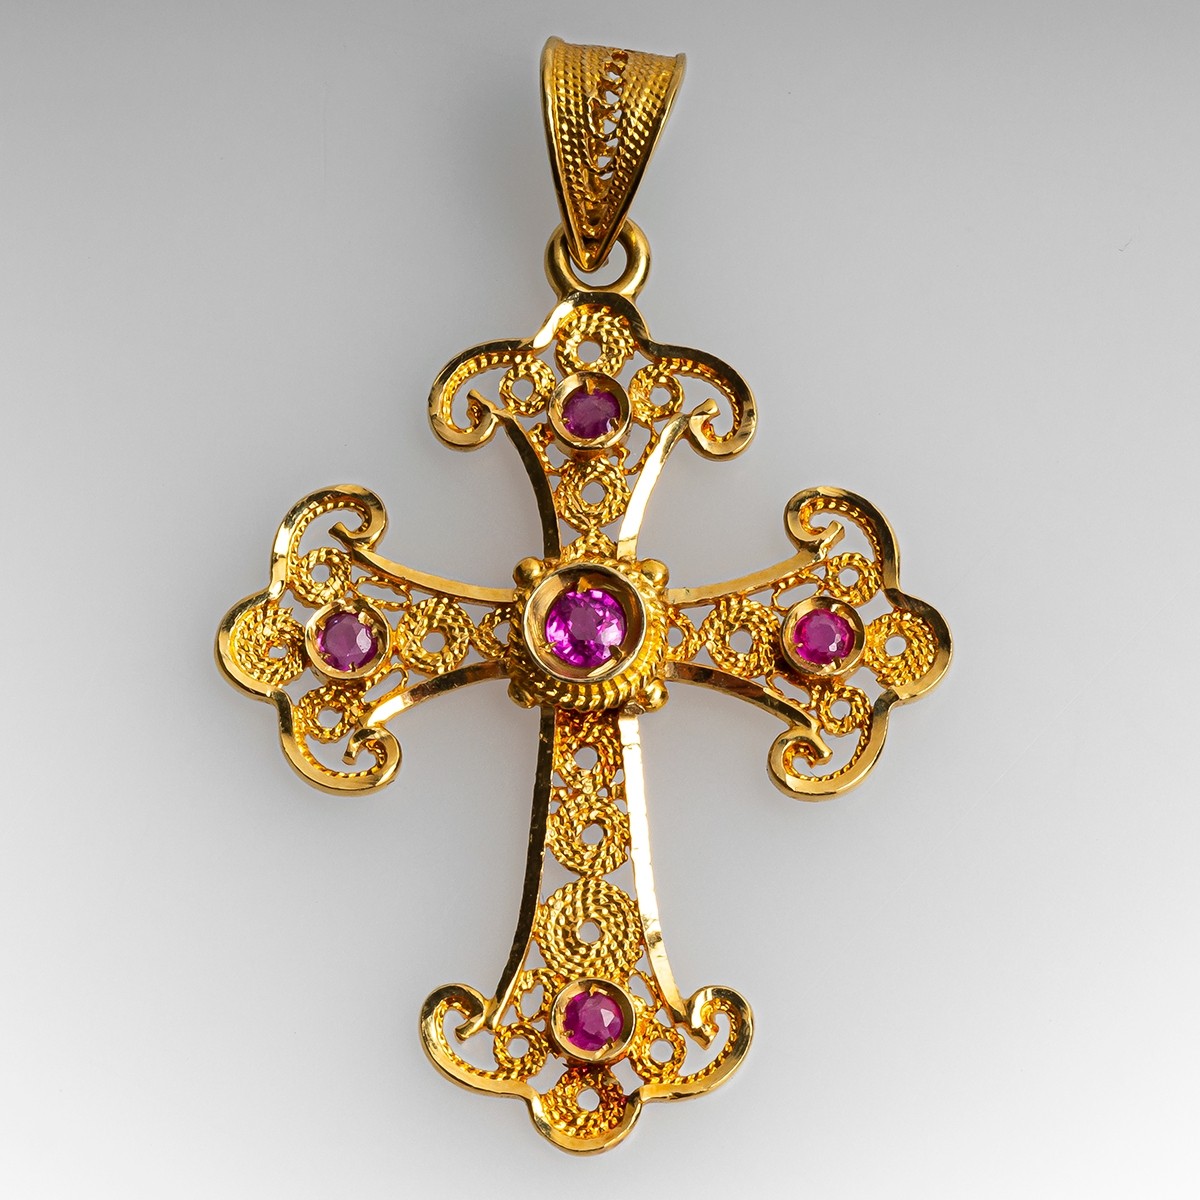 3 Ct Round Cut Pink Sapphire Royal Holy Cross Charm Pendant 14k Yellow Gold Over